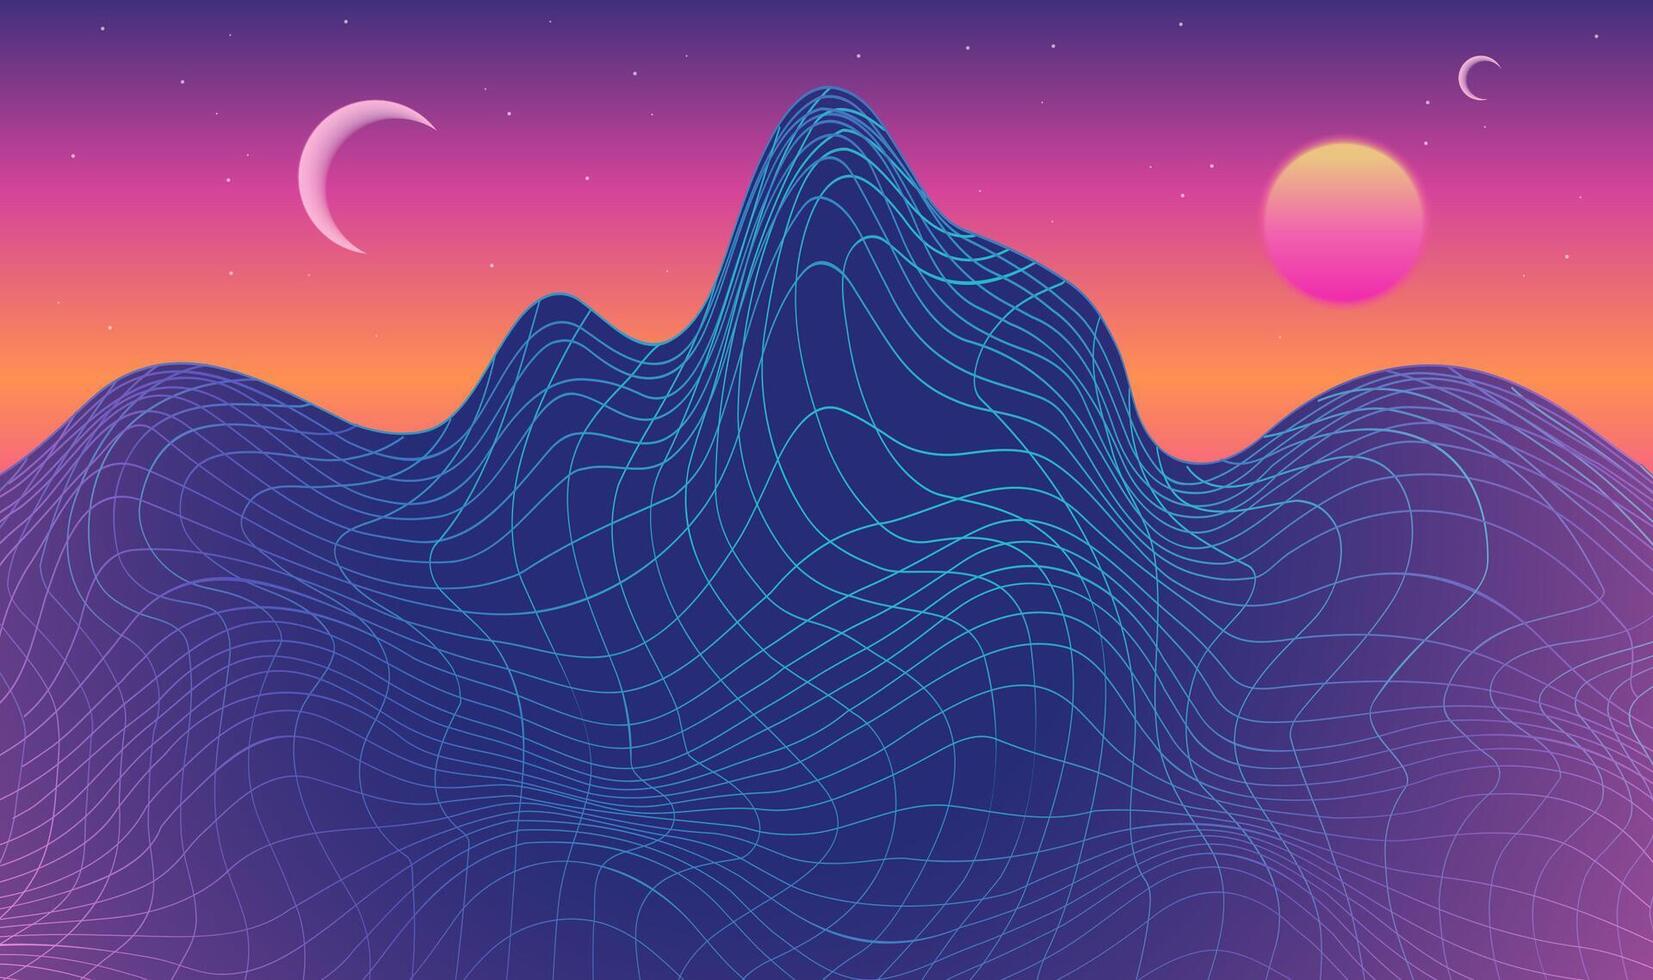 Vintage 80s synthwave styled landscape with blue grid mountains and sun over arcade space planet canyon. Vector illustration